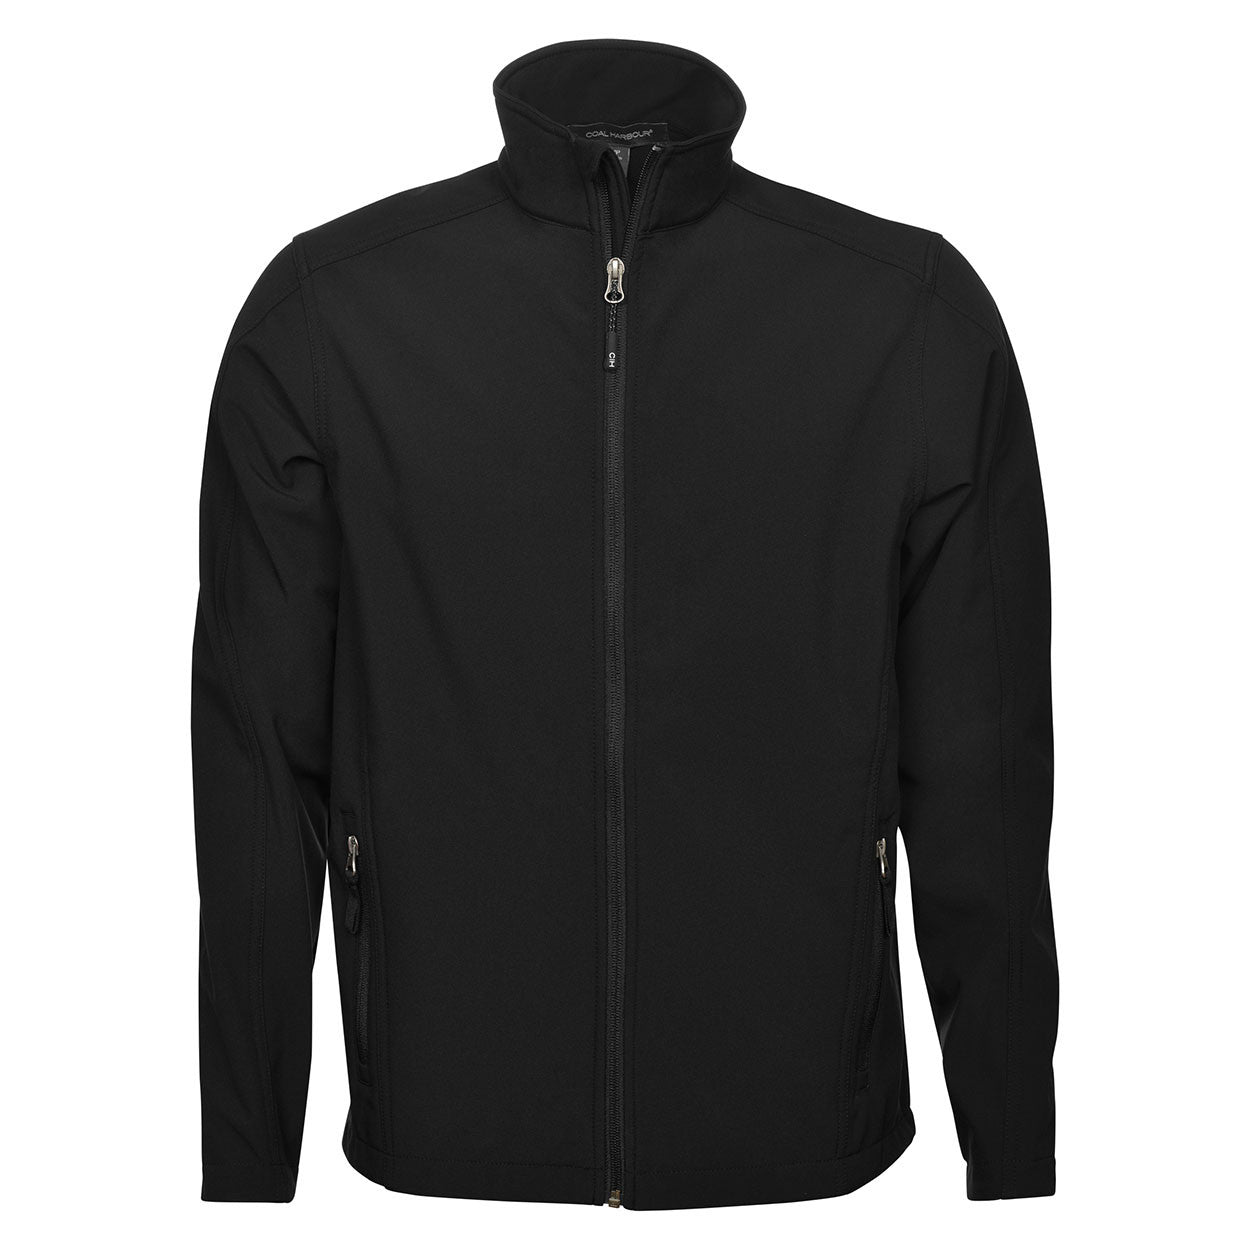 COAL HARBOUR® EVERYDAY SOFT SHELL JACKET. J7603 - Budget Promotion  Softshell CA$ 47.31